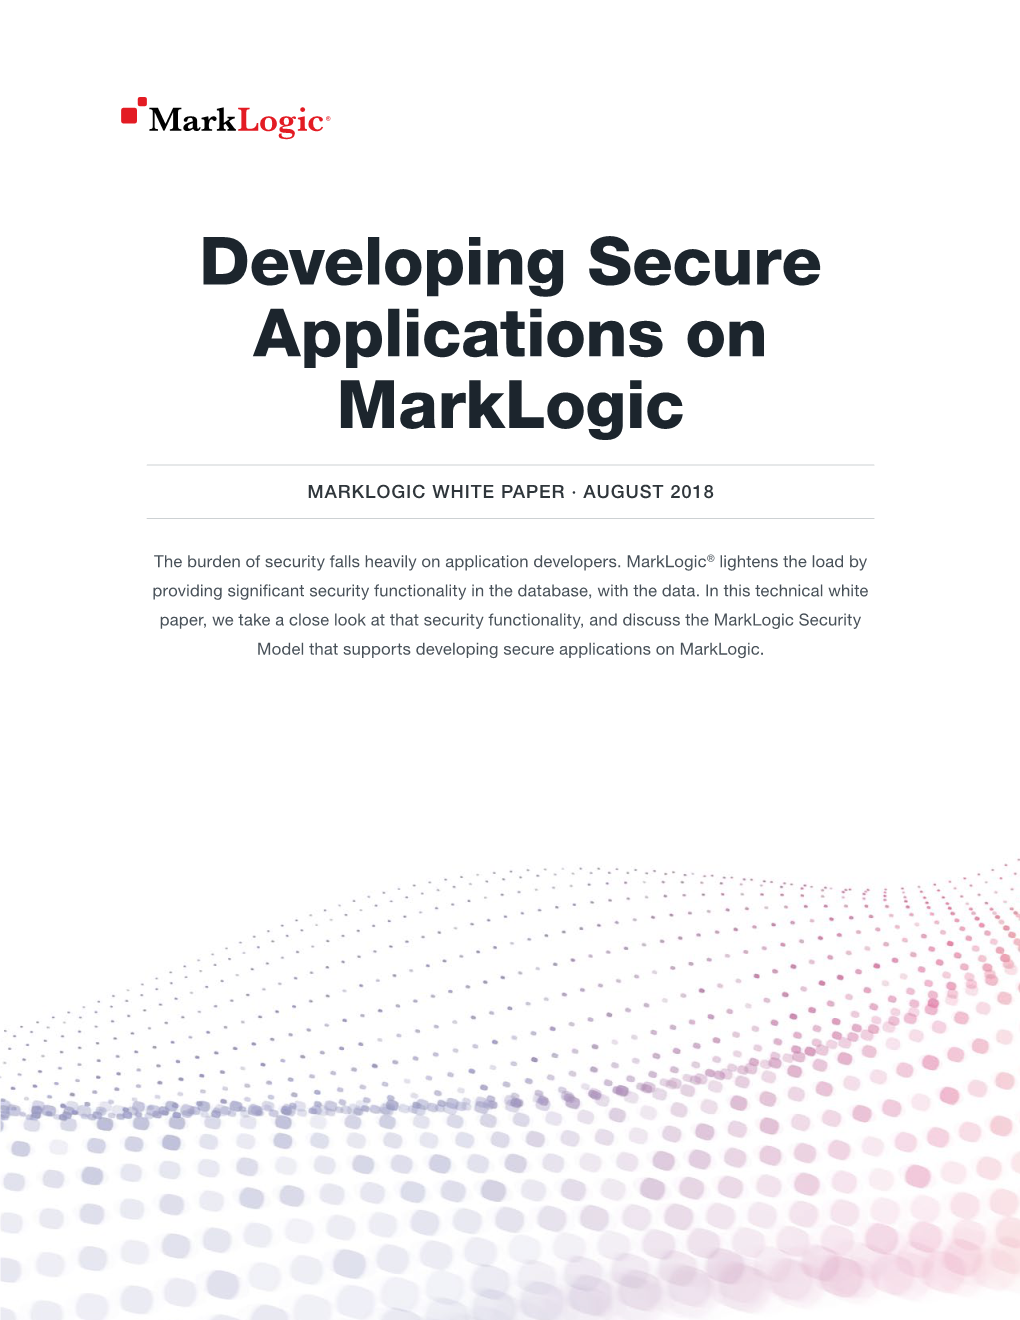 Developing Secure Applications on Marklogic